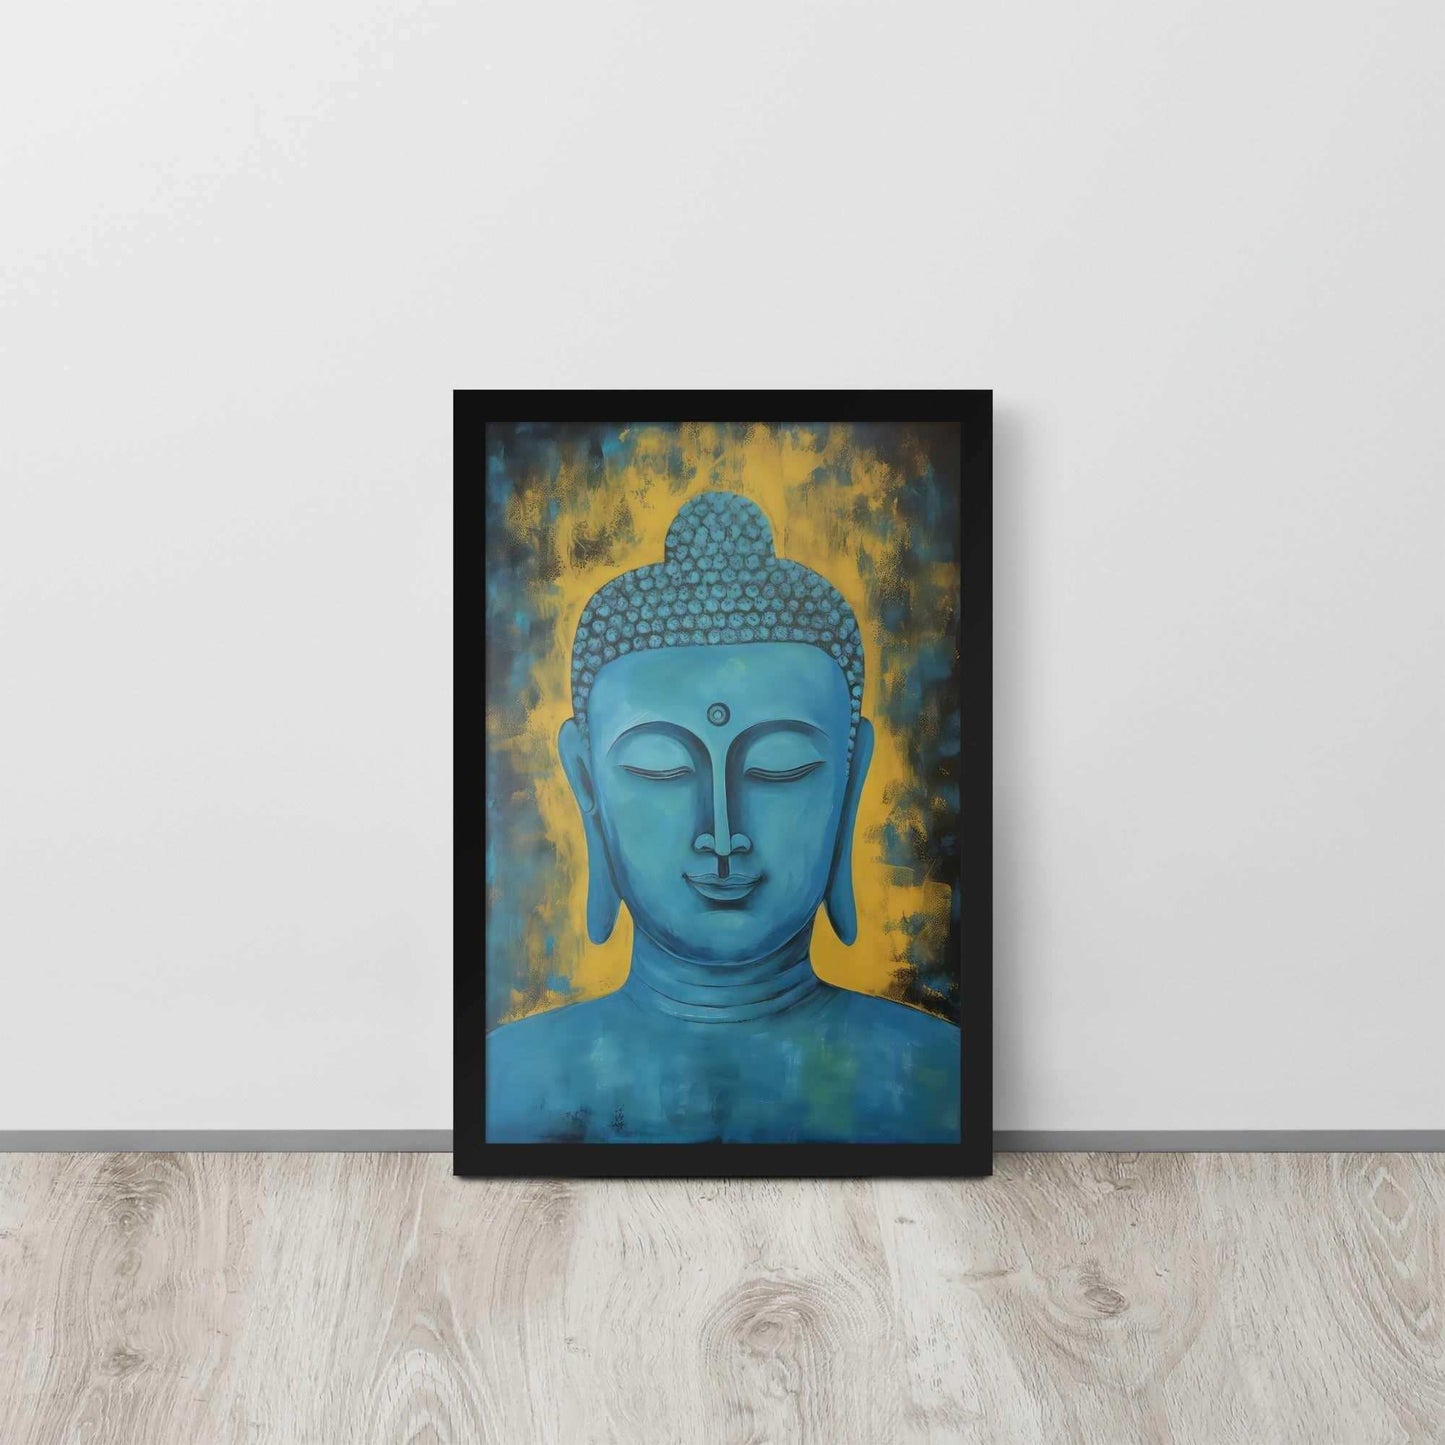 A black oak framed poster displays a Blue Buddha Healing Tibetan Art against a golden yellow background with dark, leaf-like impressions, creating a serene and contemplative artwork, propped on a light wooden floor against a white wall.